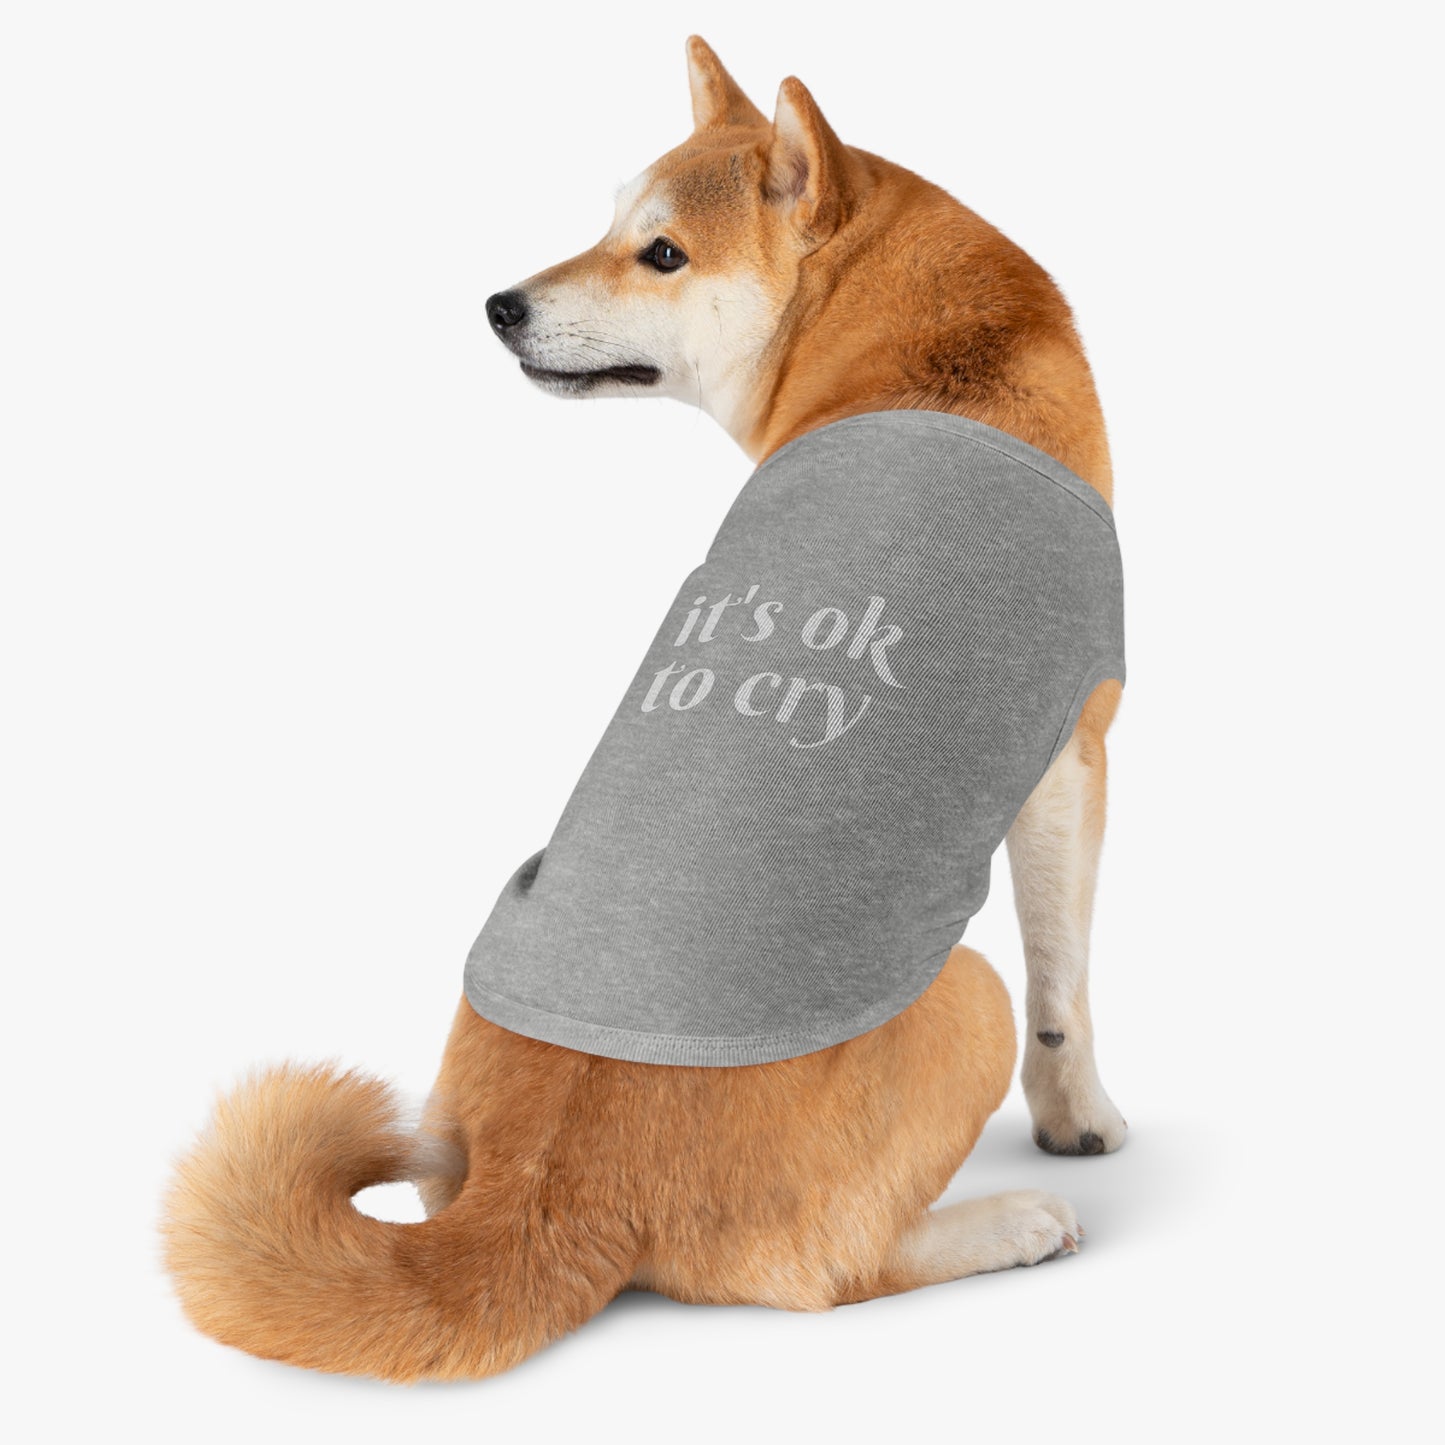 It's Okay to Cry Pet Tank Top - Comfortable and Stylish Pet Apparel